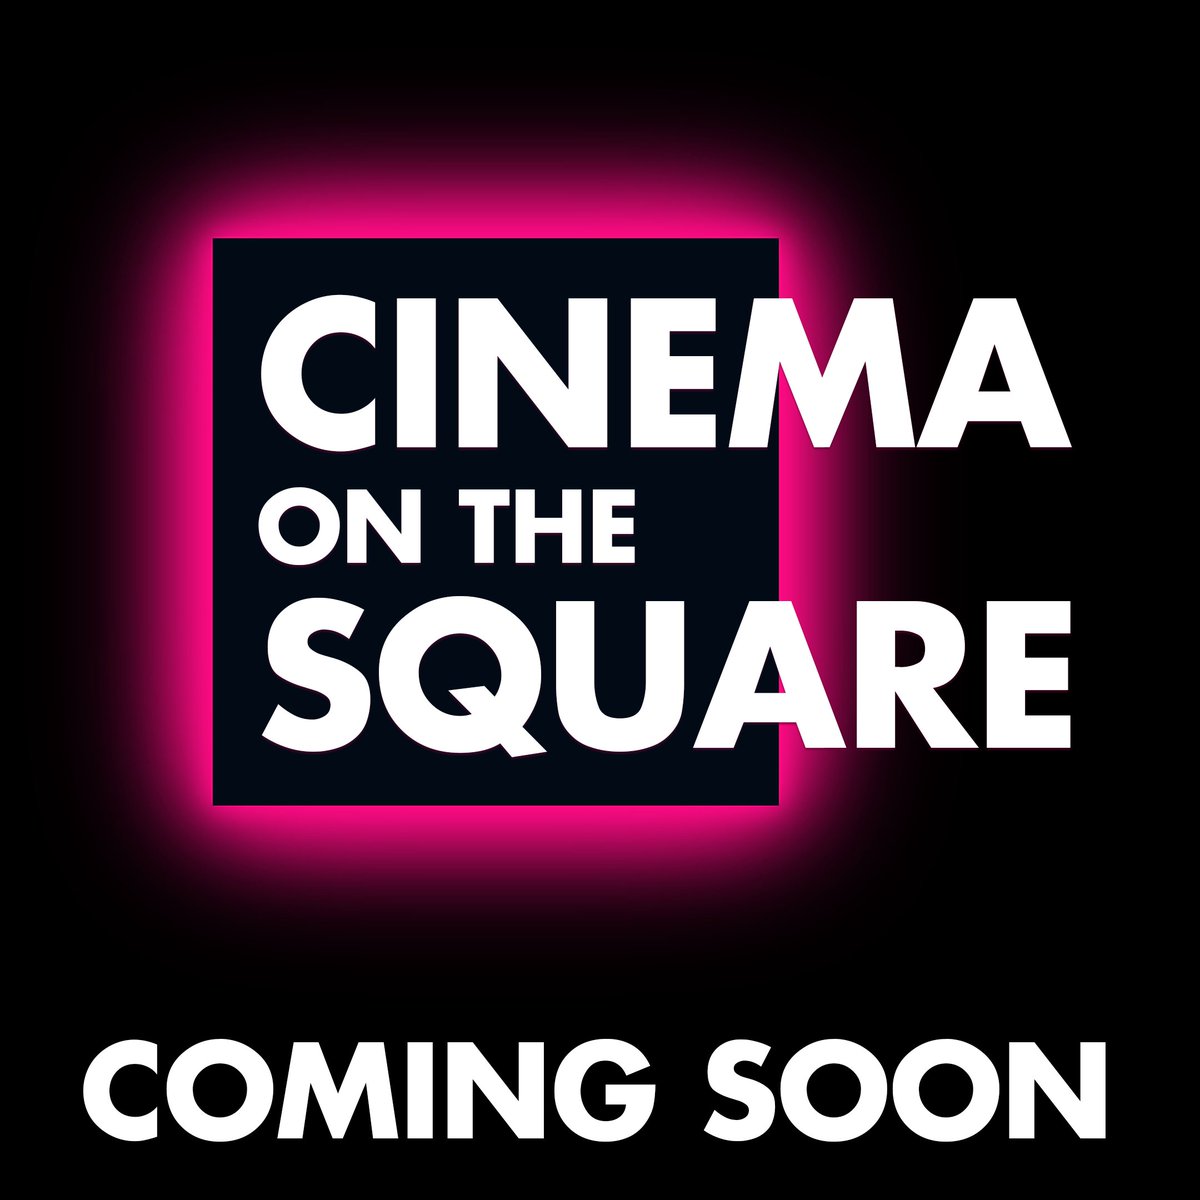 Watch a movie, concert style. ☀️ Cinema on the Square, our summer open-air cinema on Millennium Square will be back this year, 24 July - 26 July. #CinemaOnTheSquare @millsqleeds The full programme will be announced closer to the event dates. Stay tuned for more. 👀